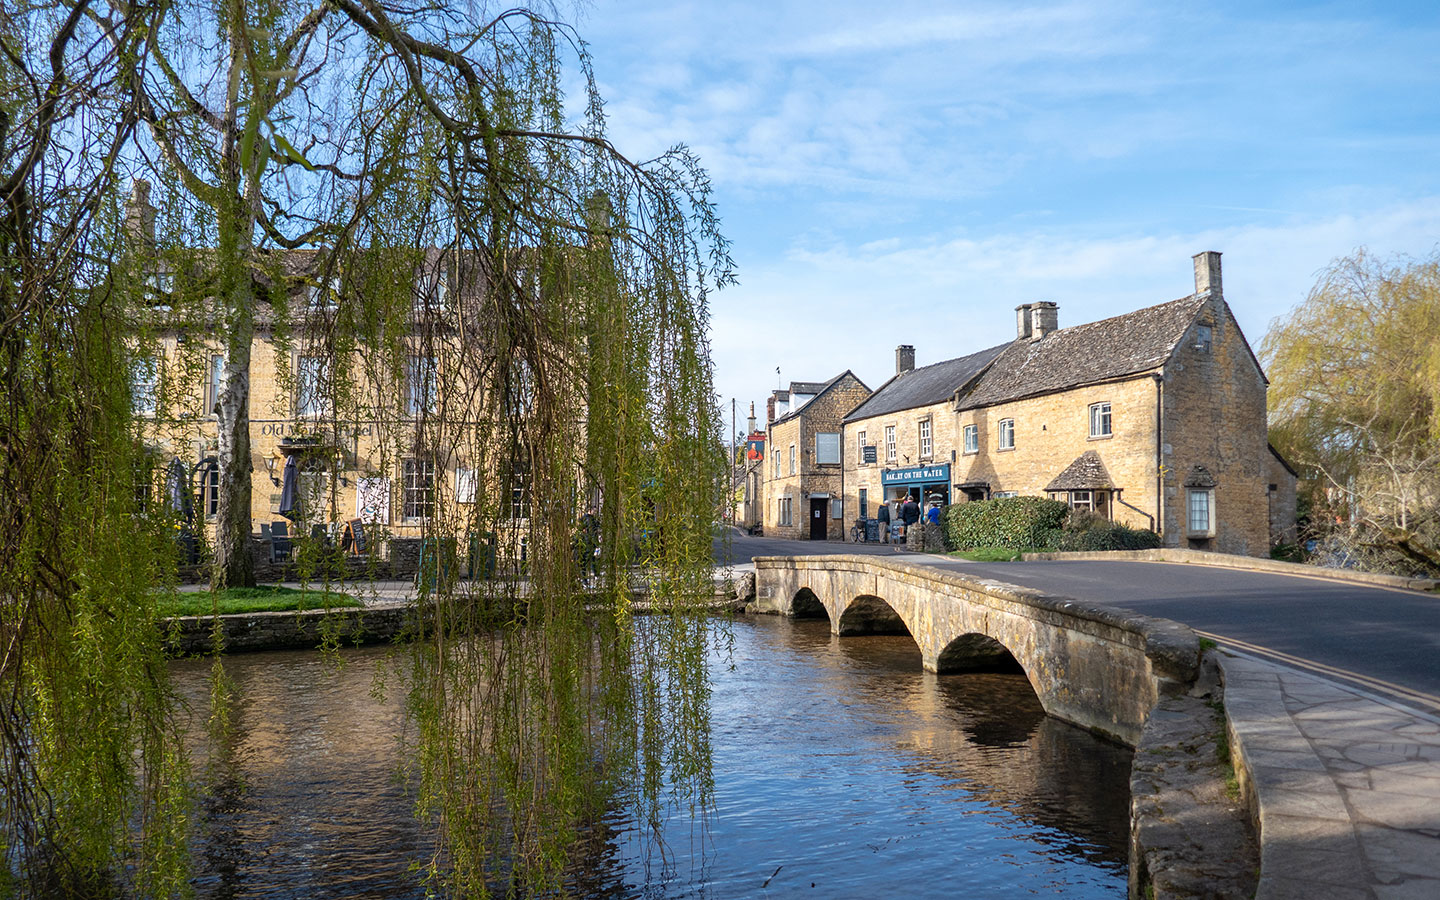 The River Windrush in Bourton-on-the-Water, Cotswolds